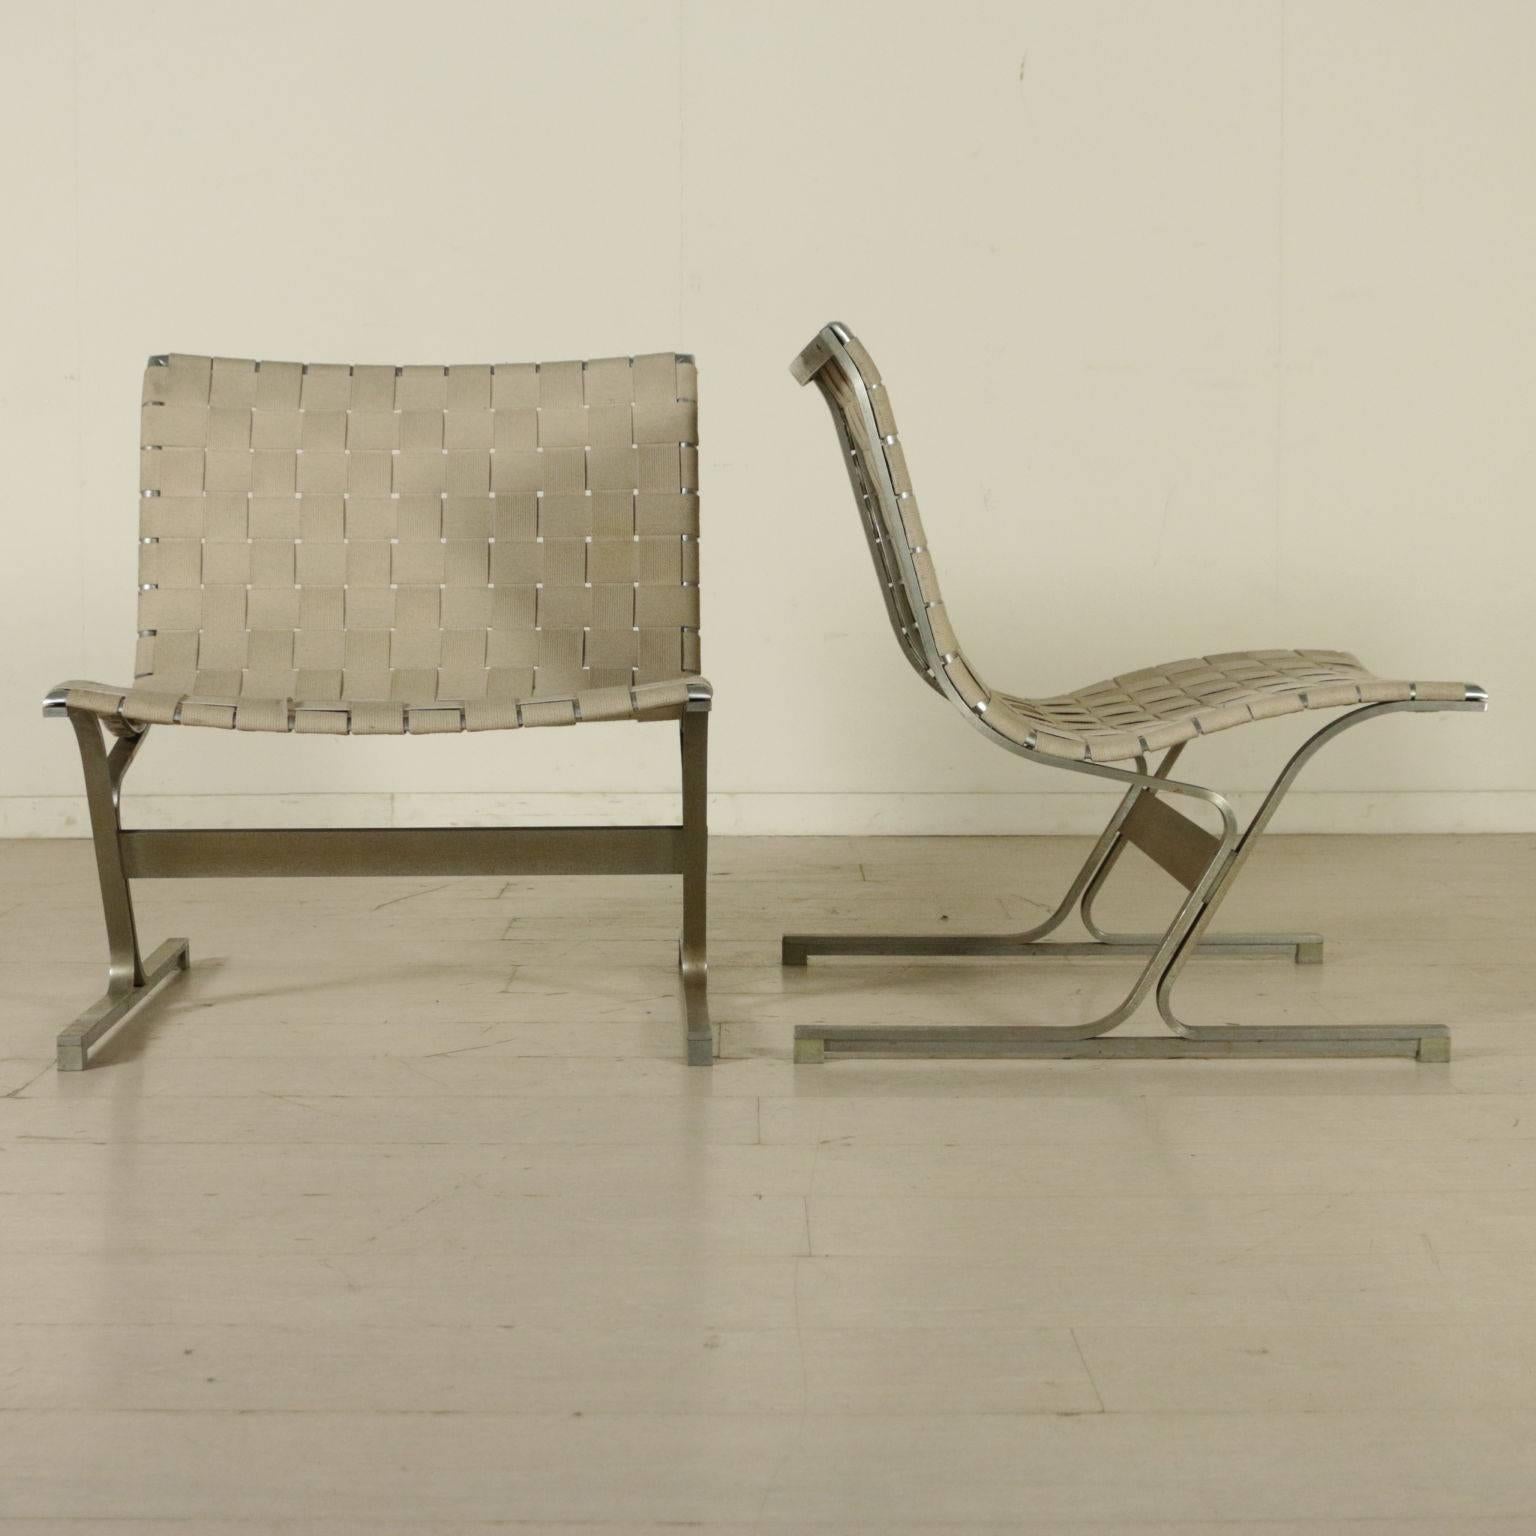 A pair of armchairs designed for ICF, steel structure, back and seat with weave bands. Model: PLR 1. Manufactured in Italy, (Vignate), 1970s.